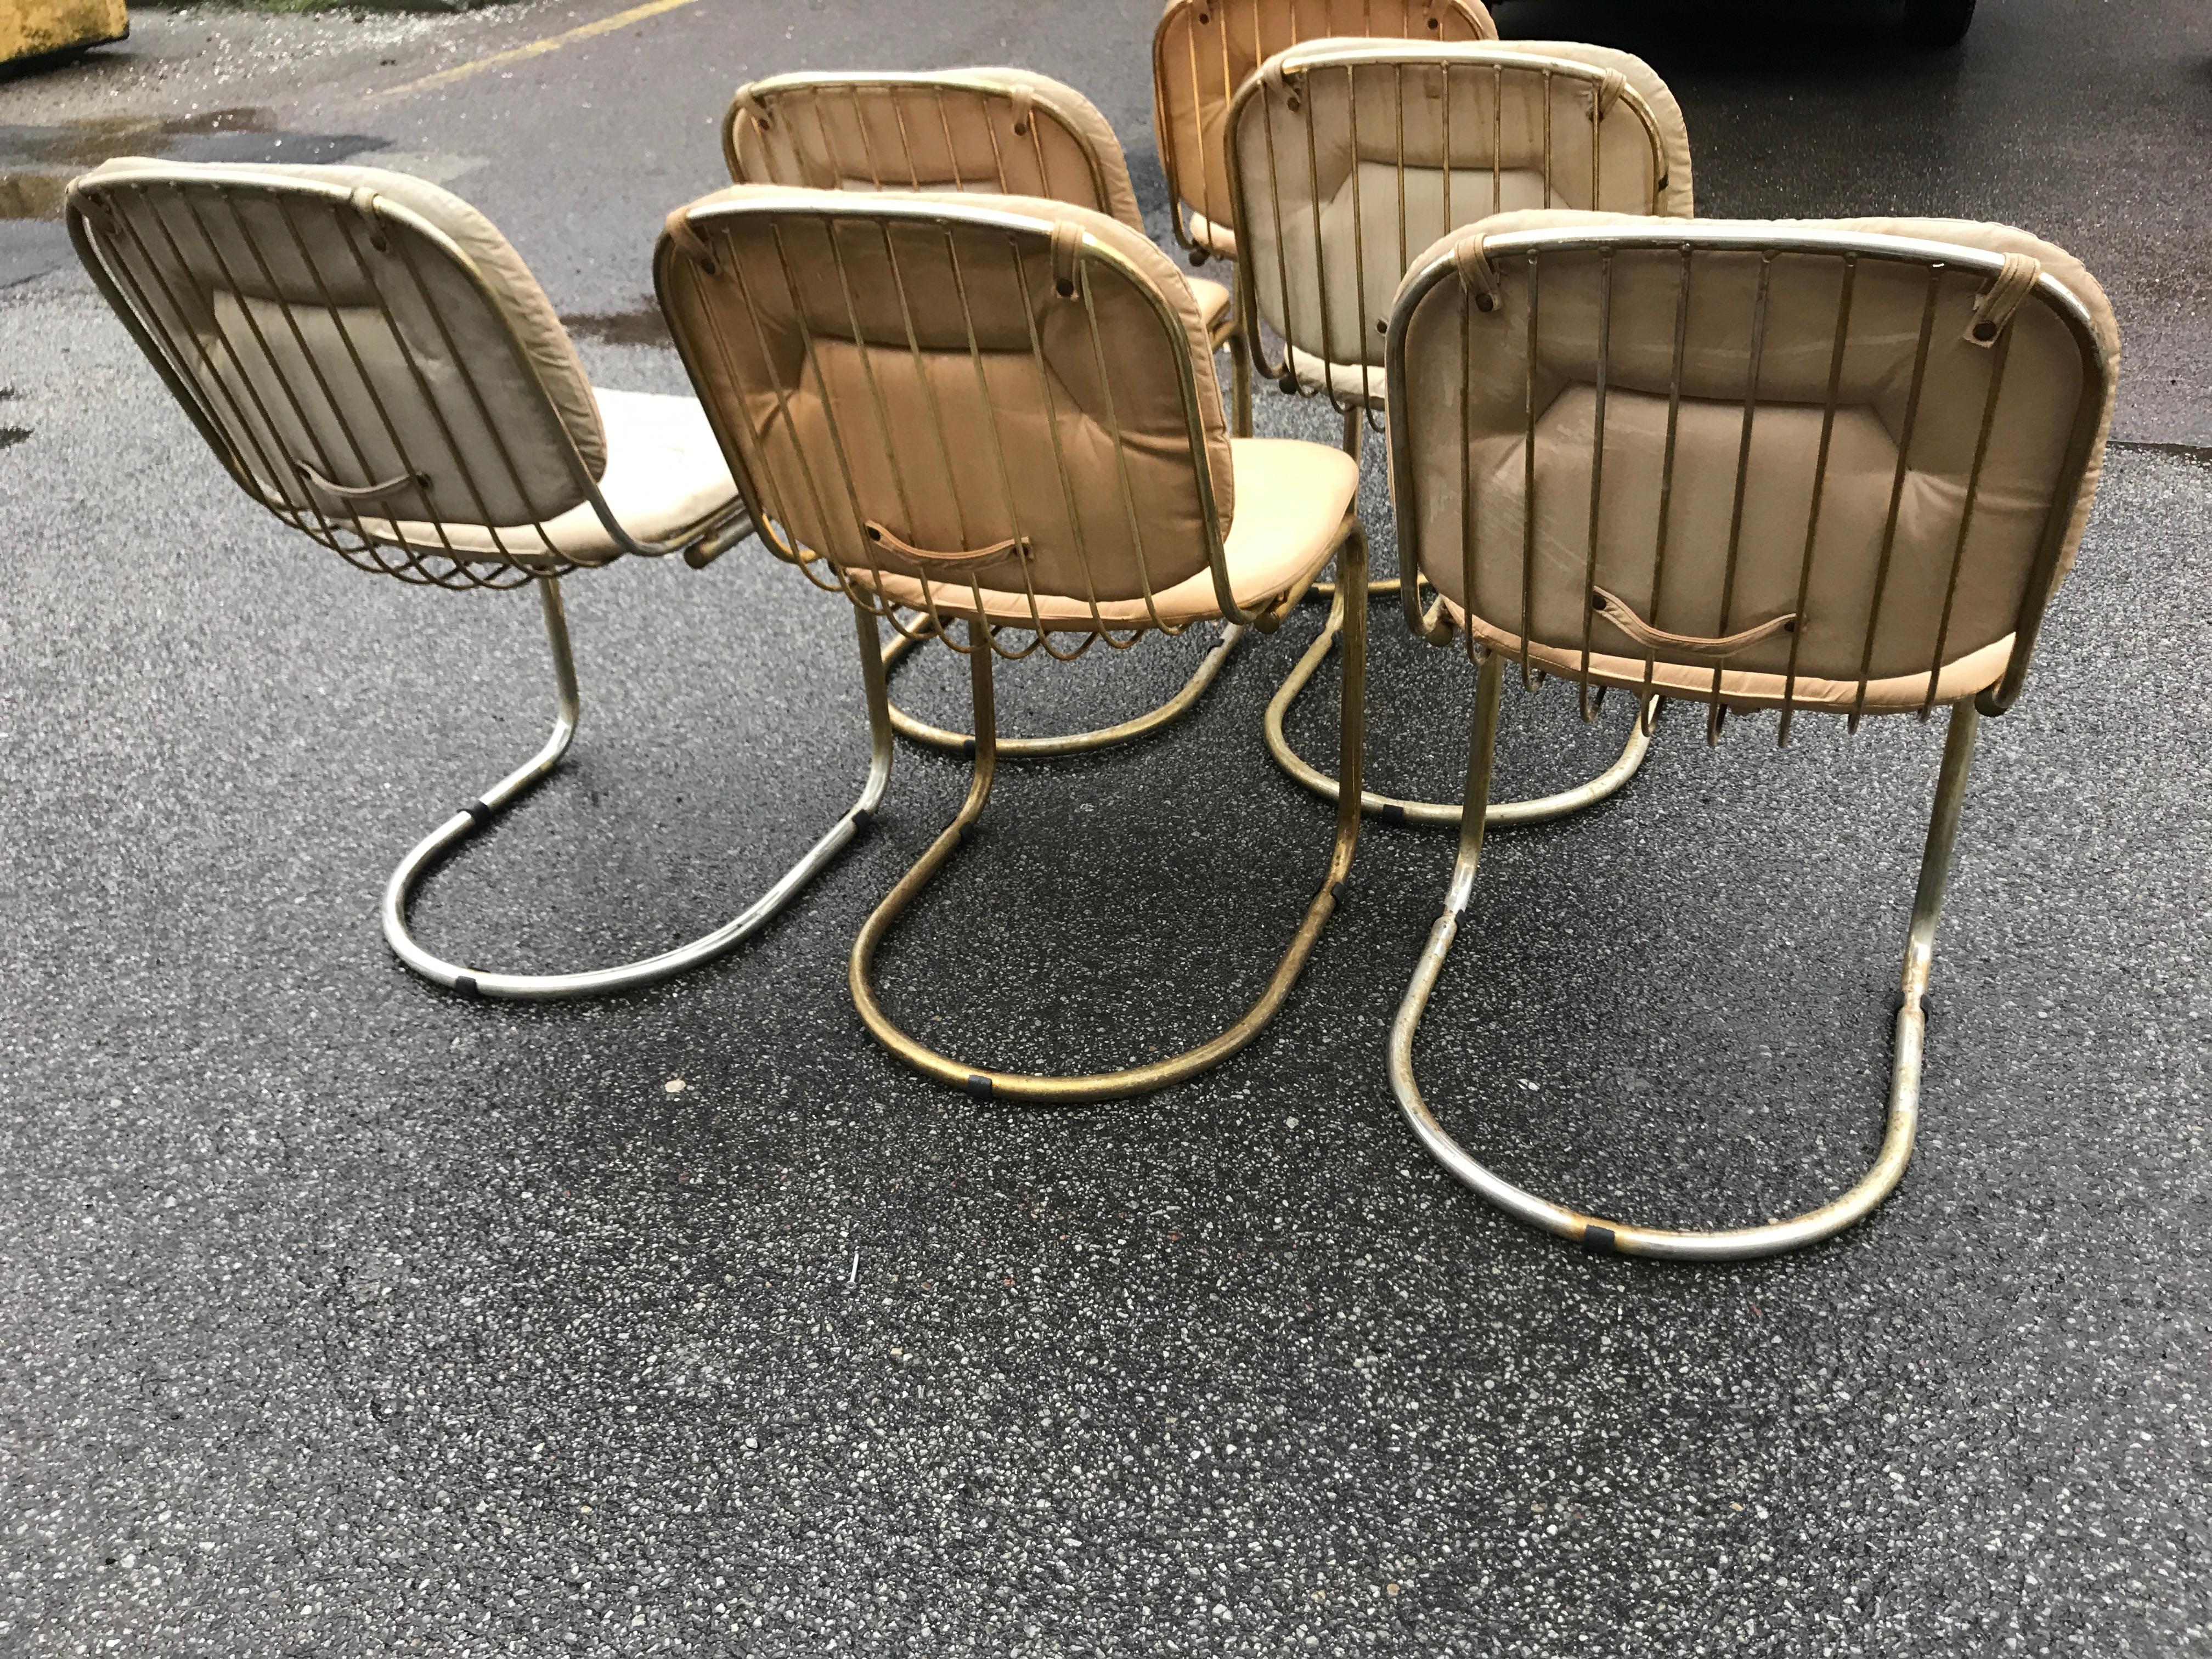 A set of 6 Italian Art Deco dining chairs from the 1970s.